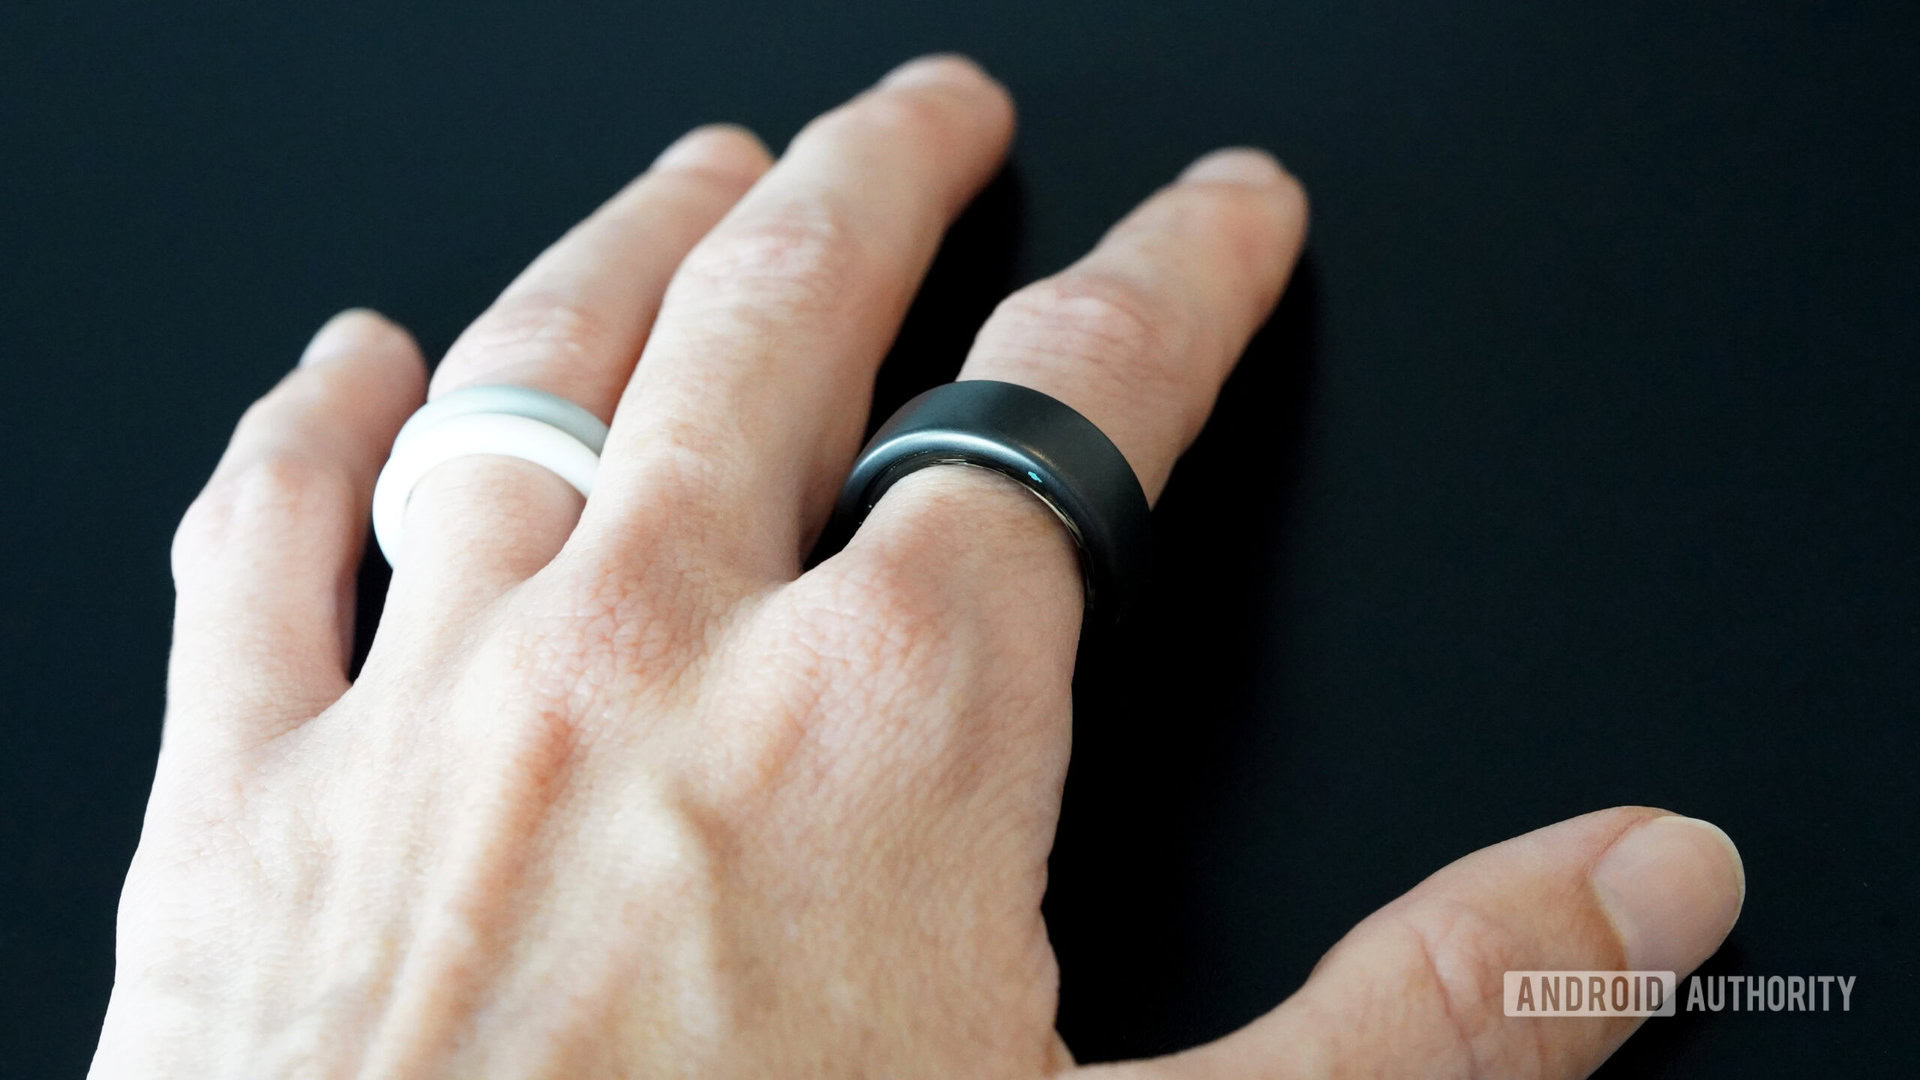 Apple is thinking about a smart ring for notifications and controlling  iPhones